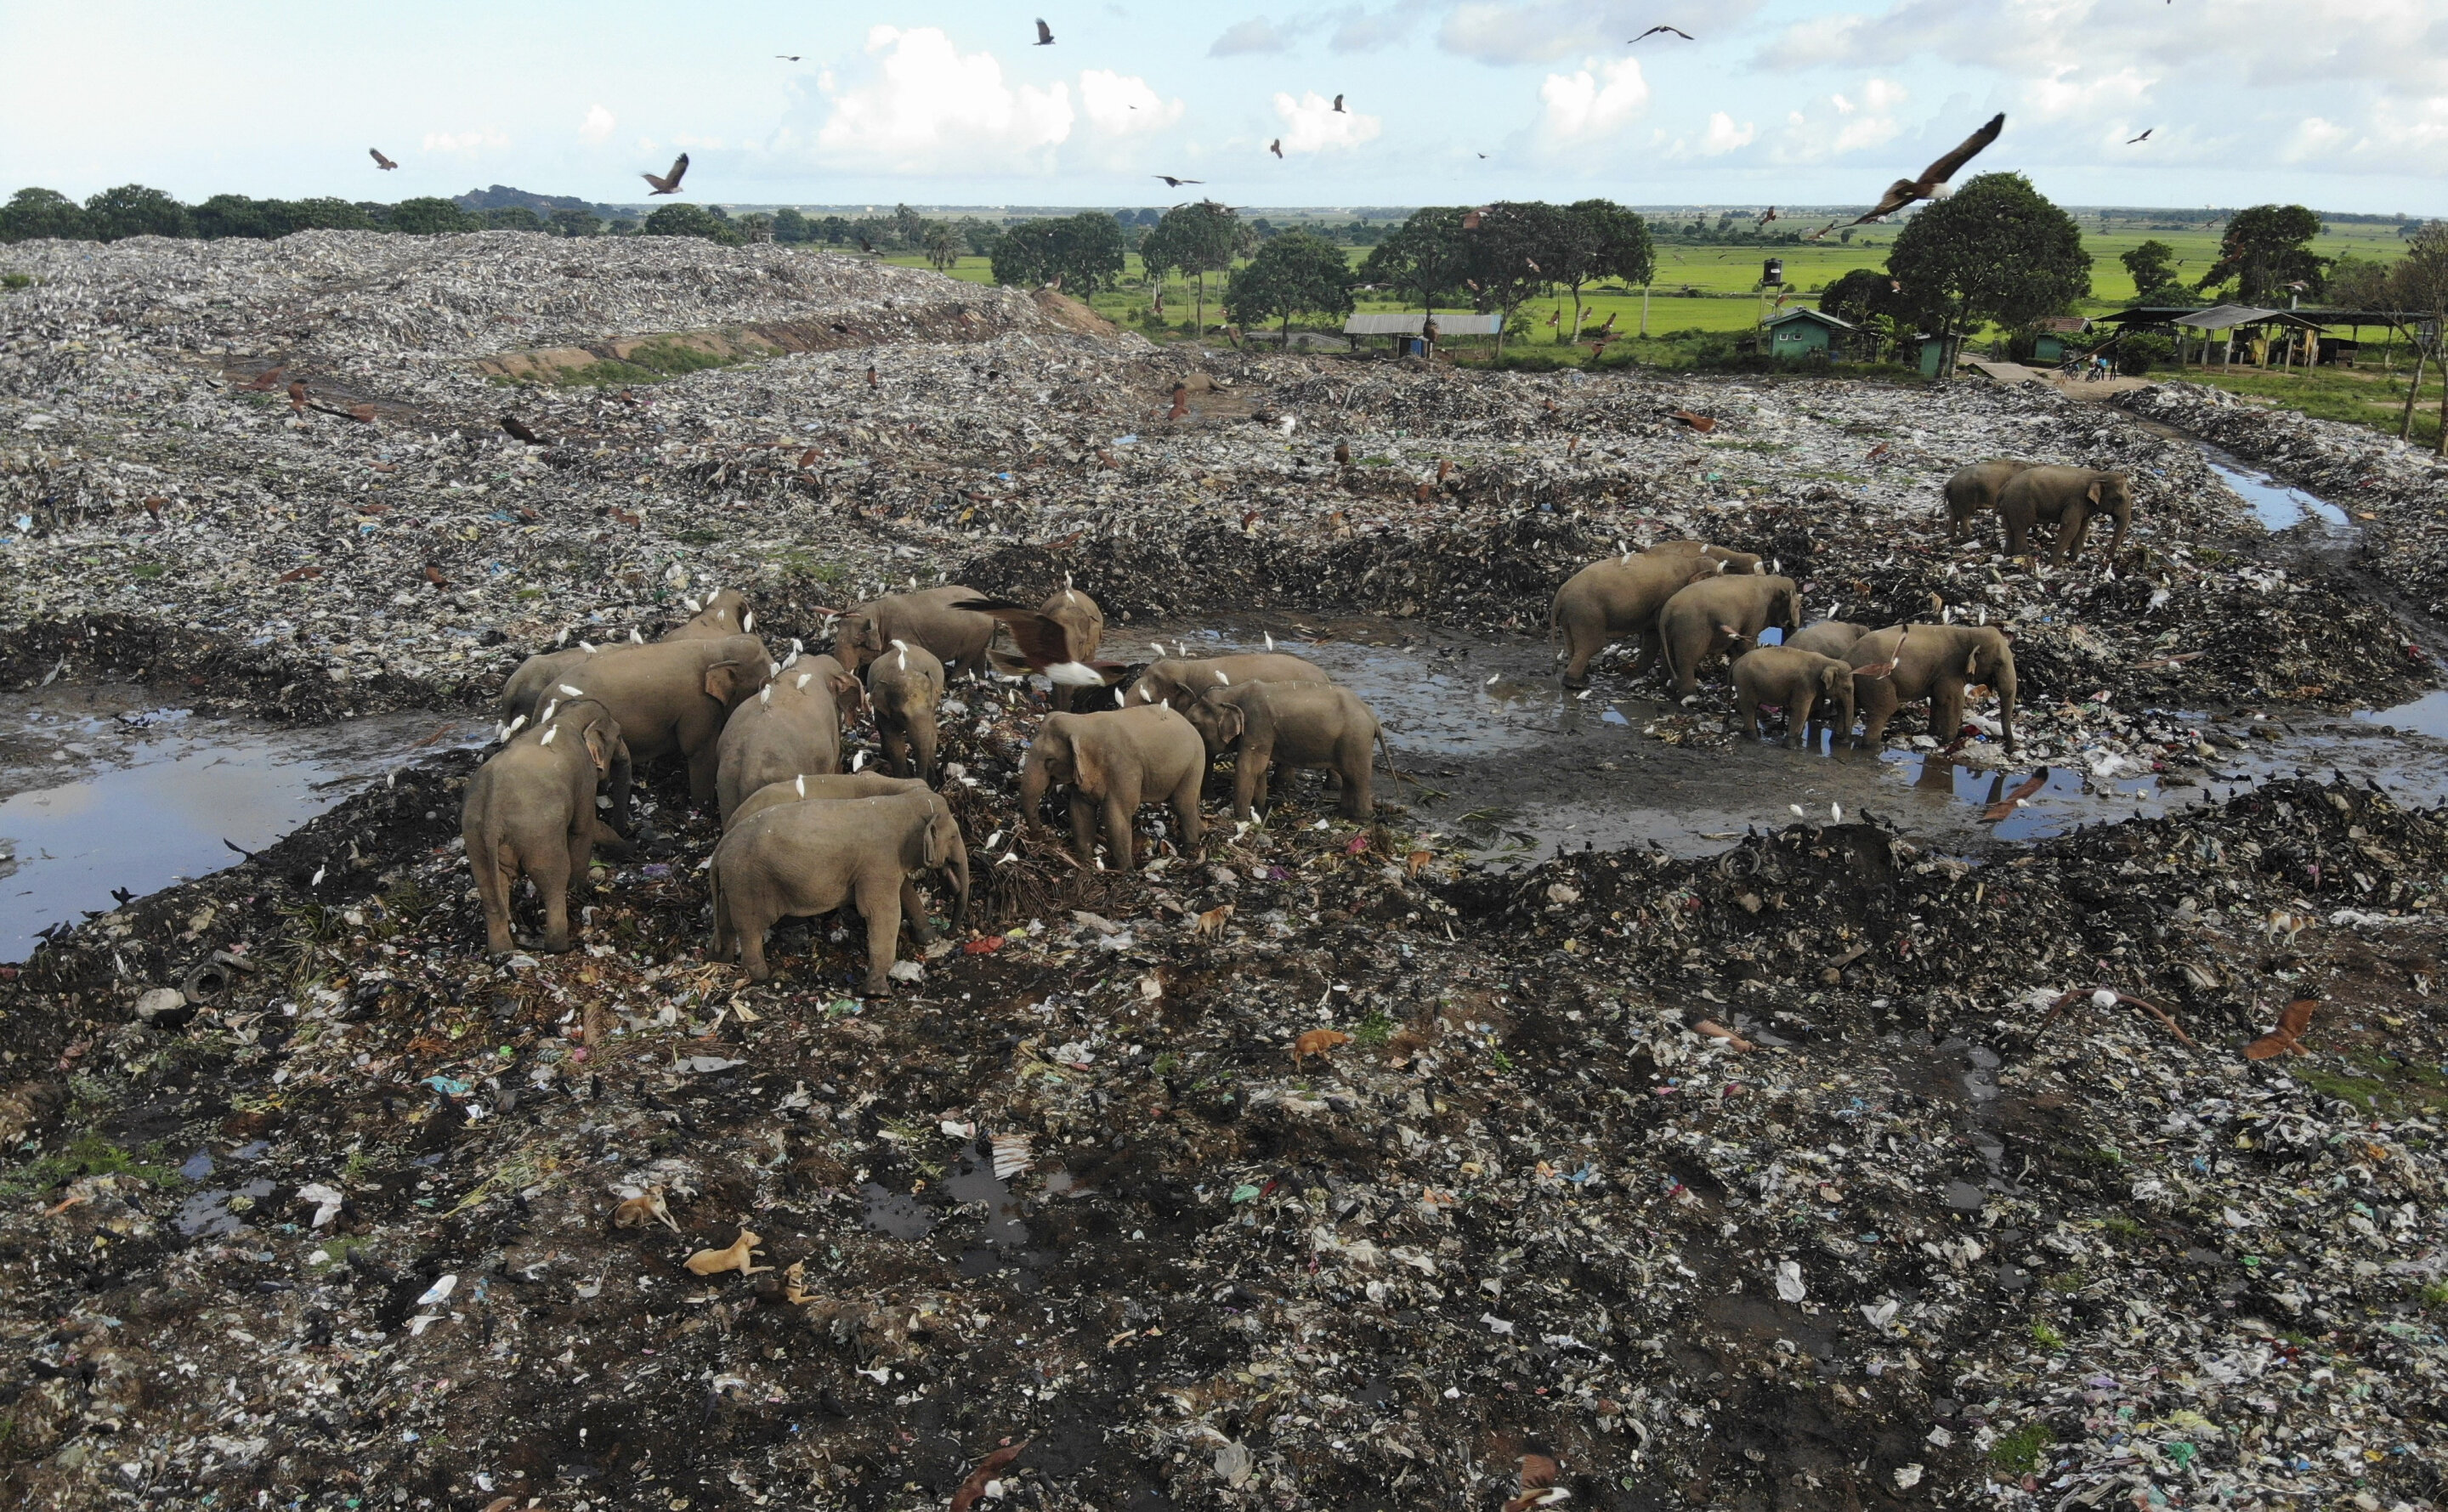 photo of Elephants dying from eating plastic waste in Sri Lankan dump image